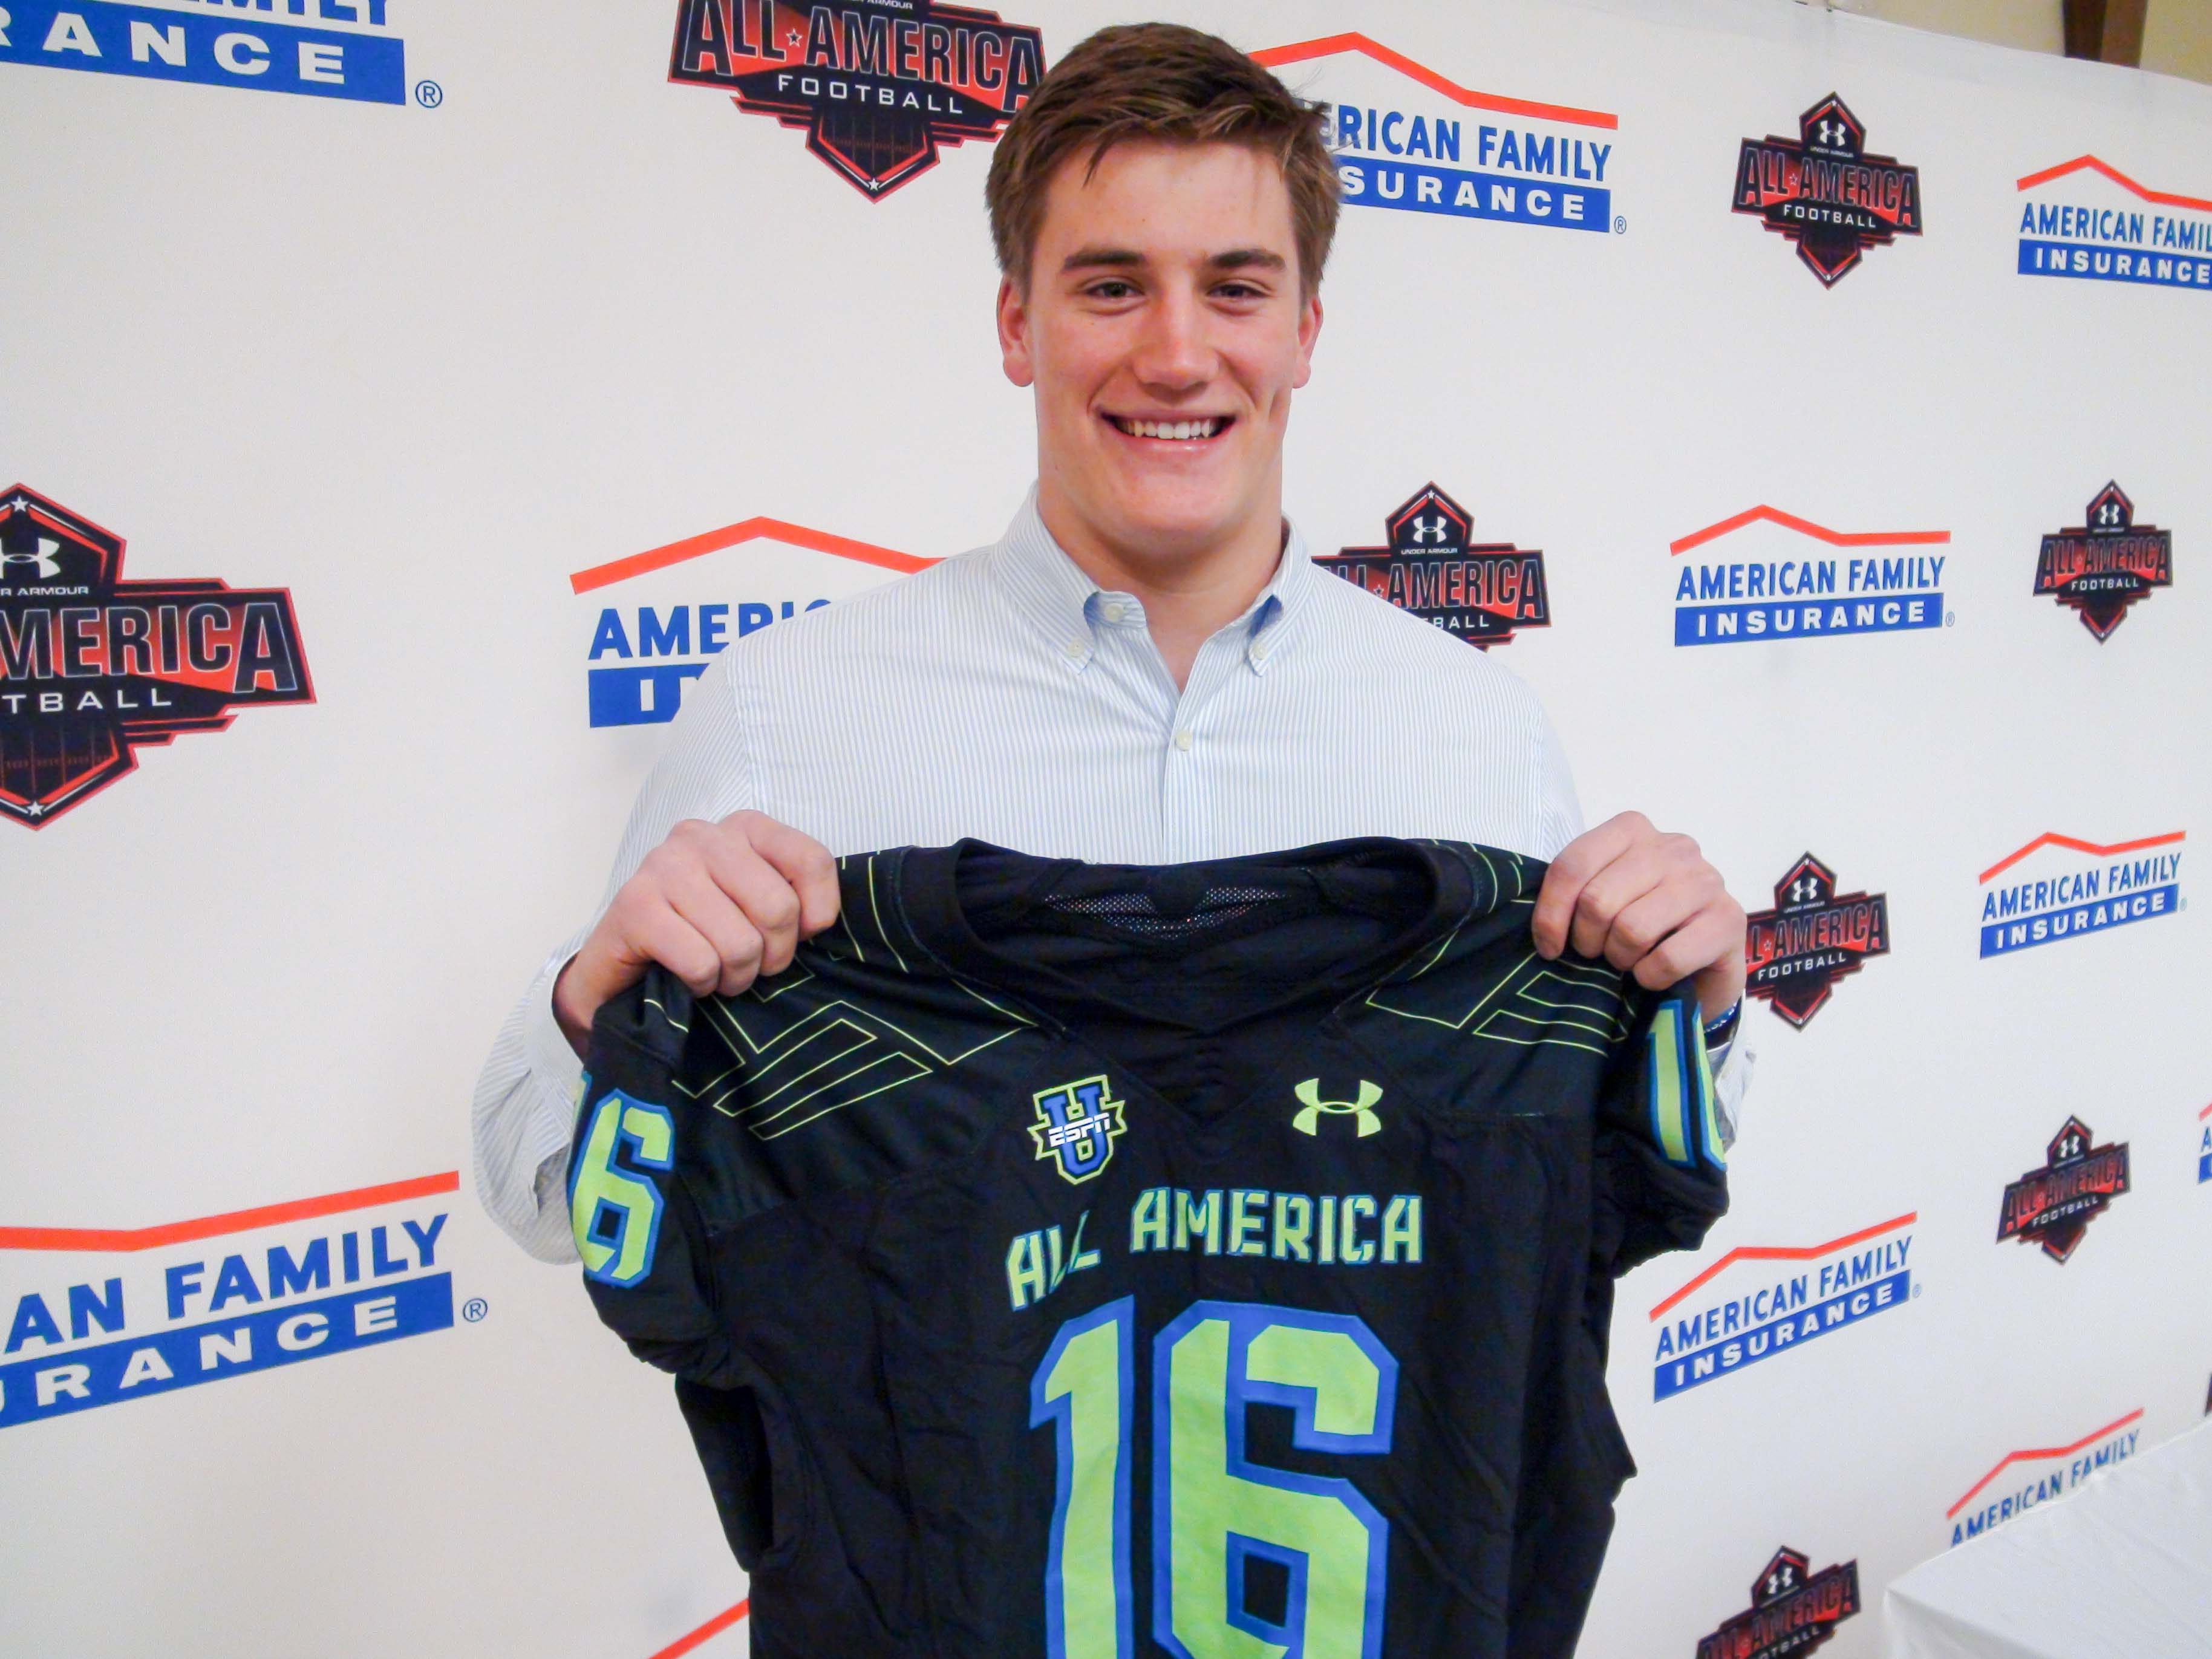 Scooter Harrington shows off his Under Armour All-America jersey (Photo: Intersport)